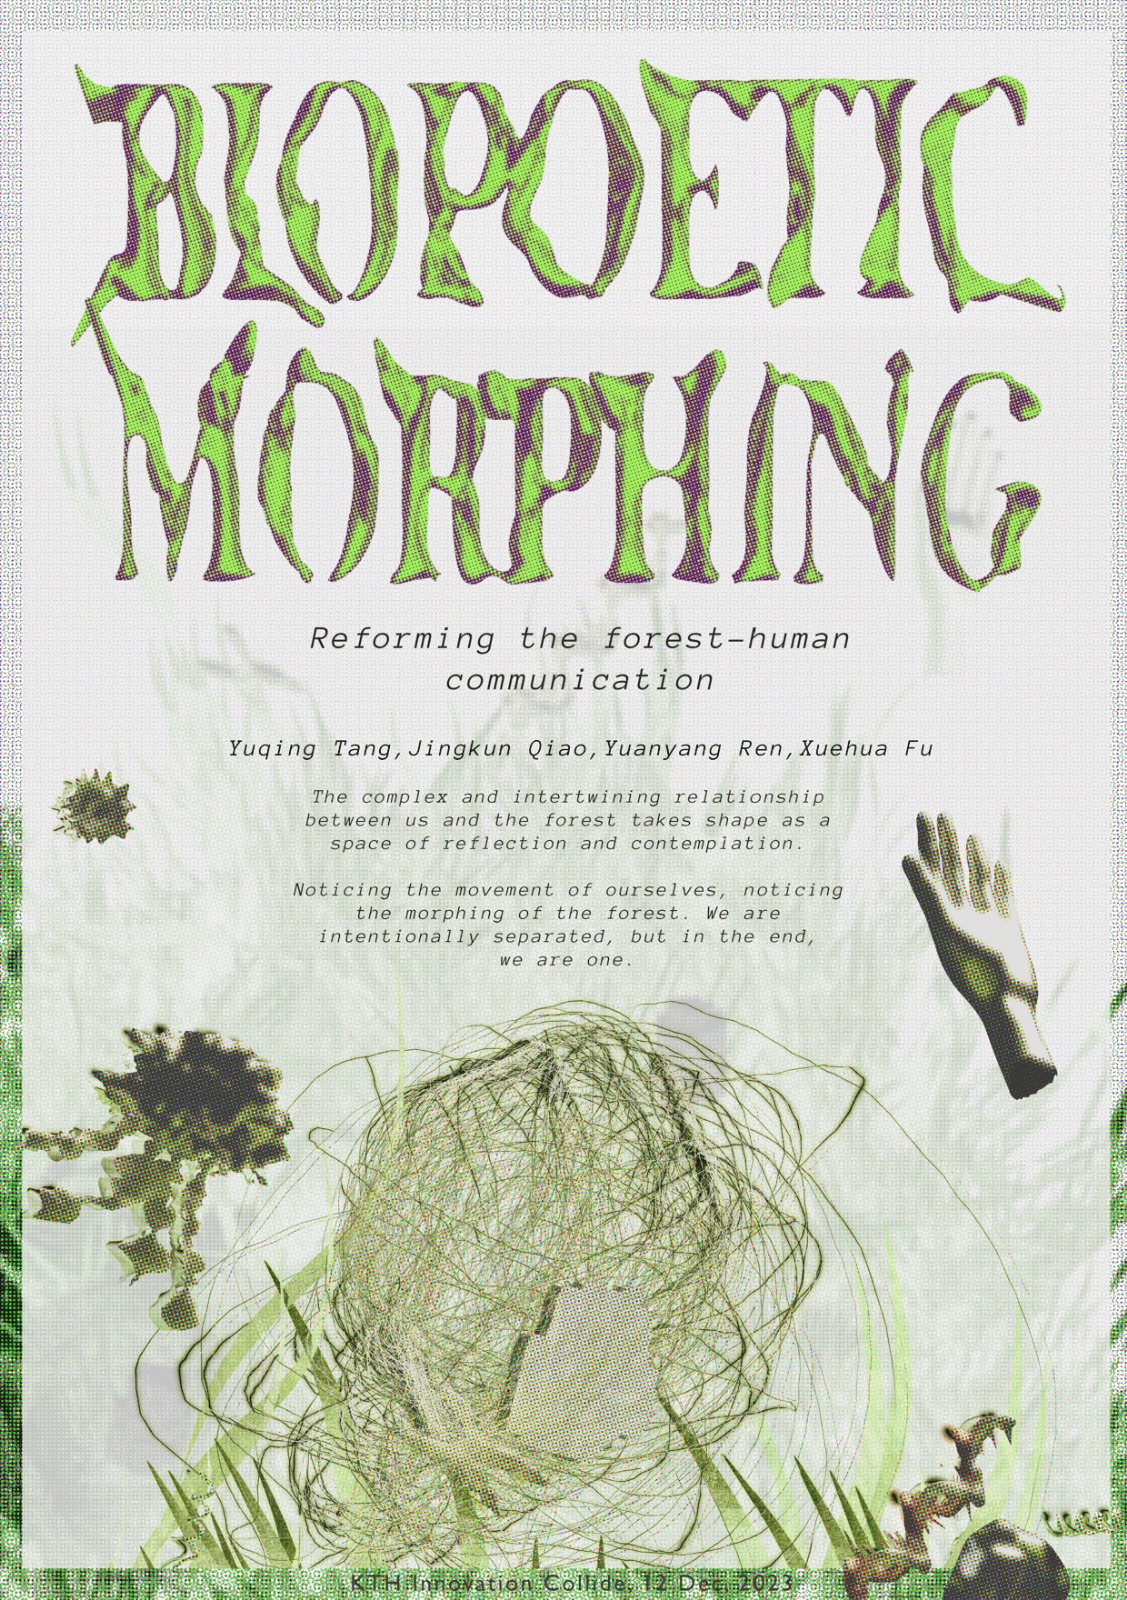 Illustrative image and team members' names written for the project 'Biopoetic Morphing'